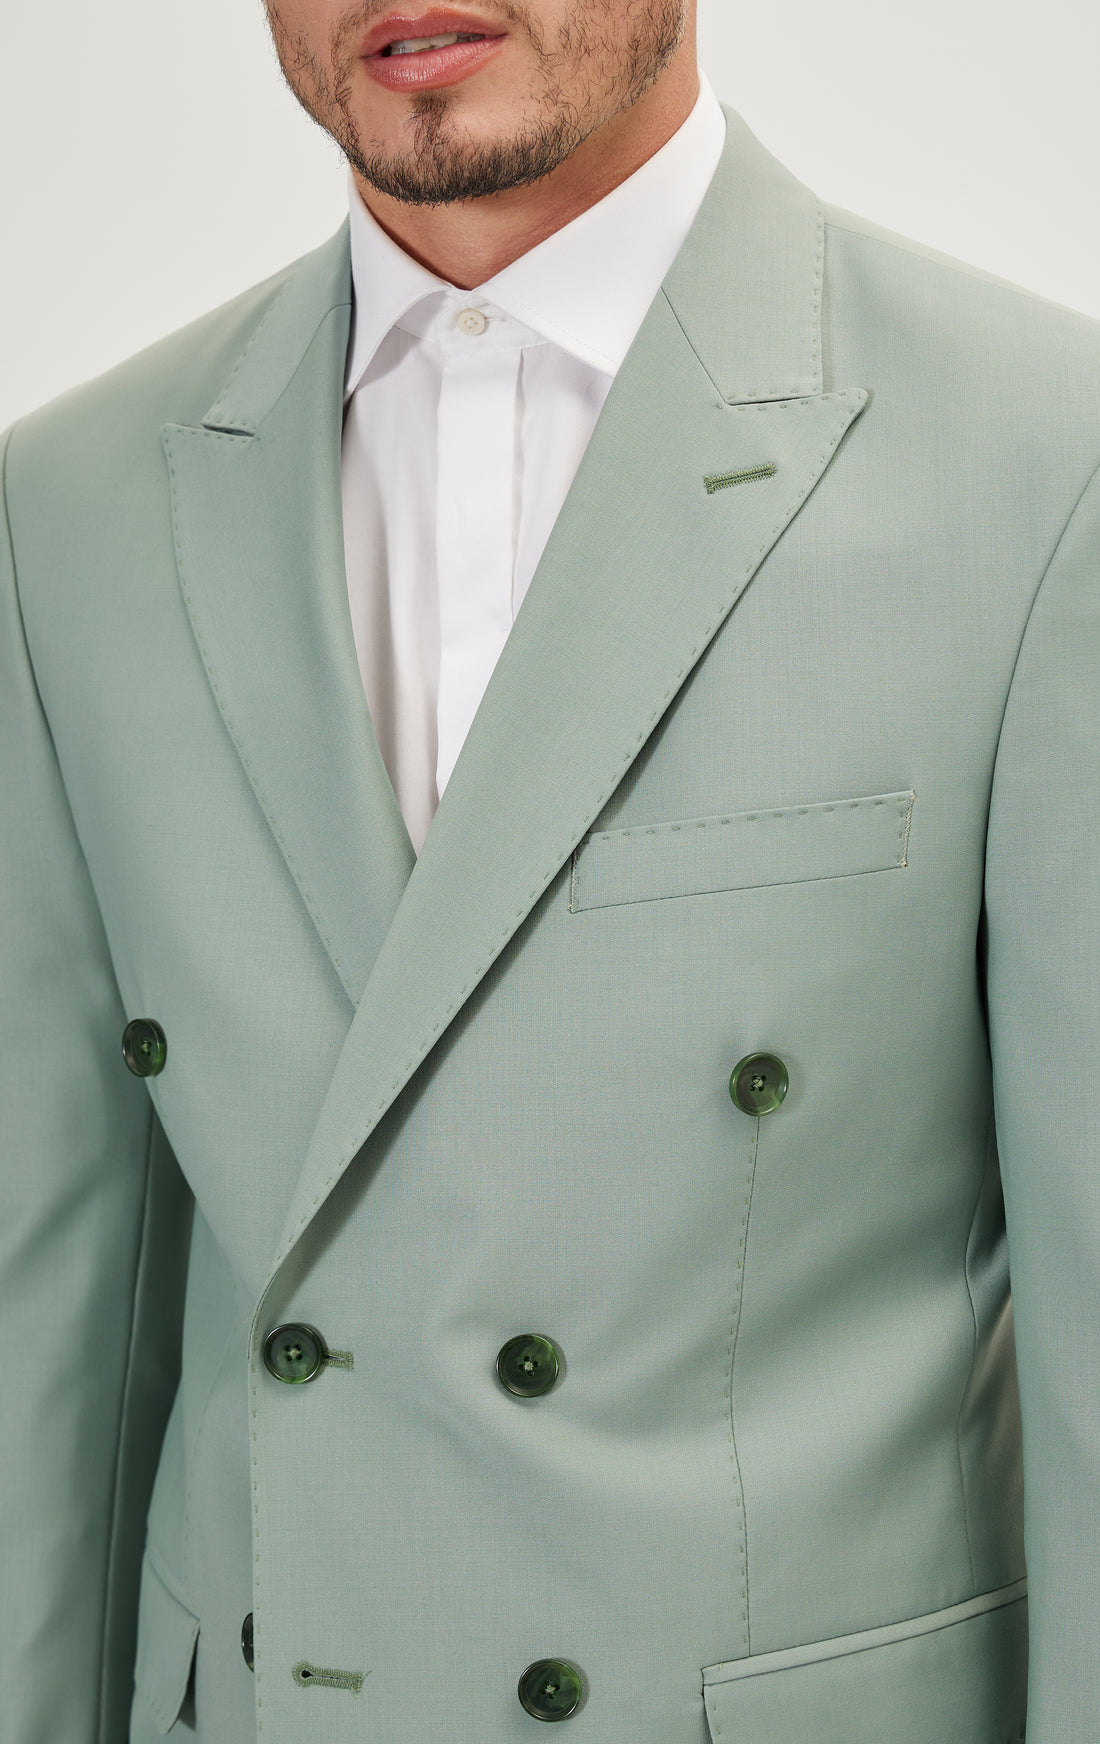 Super 120S Merino Wool Double Breasted Suit - Sage Green